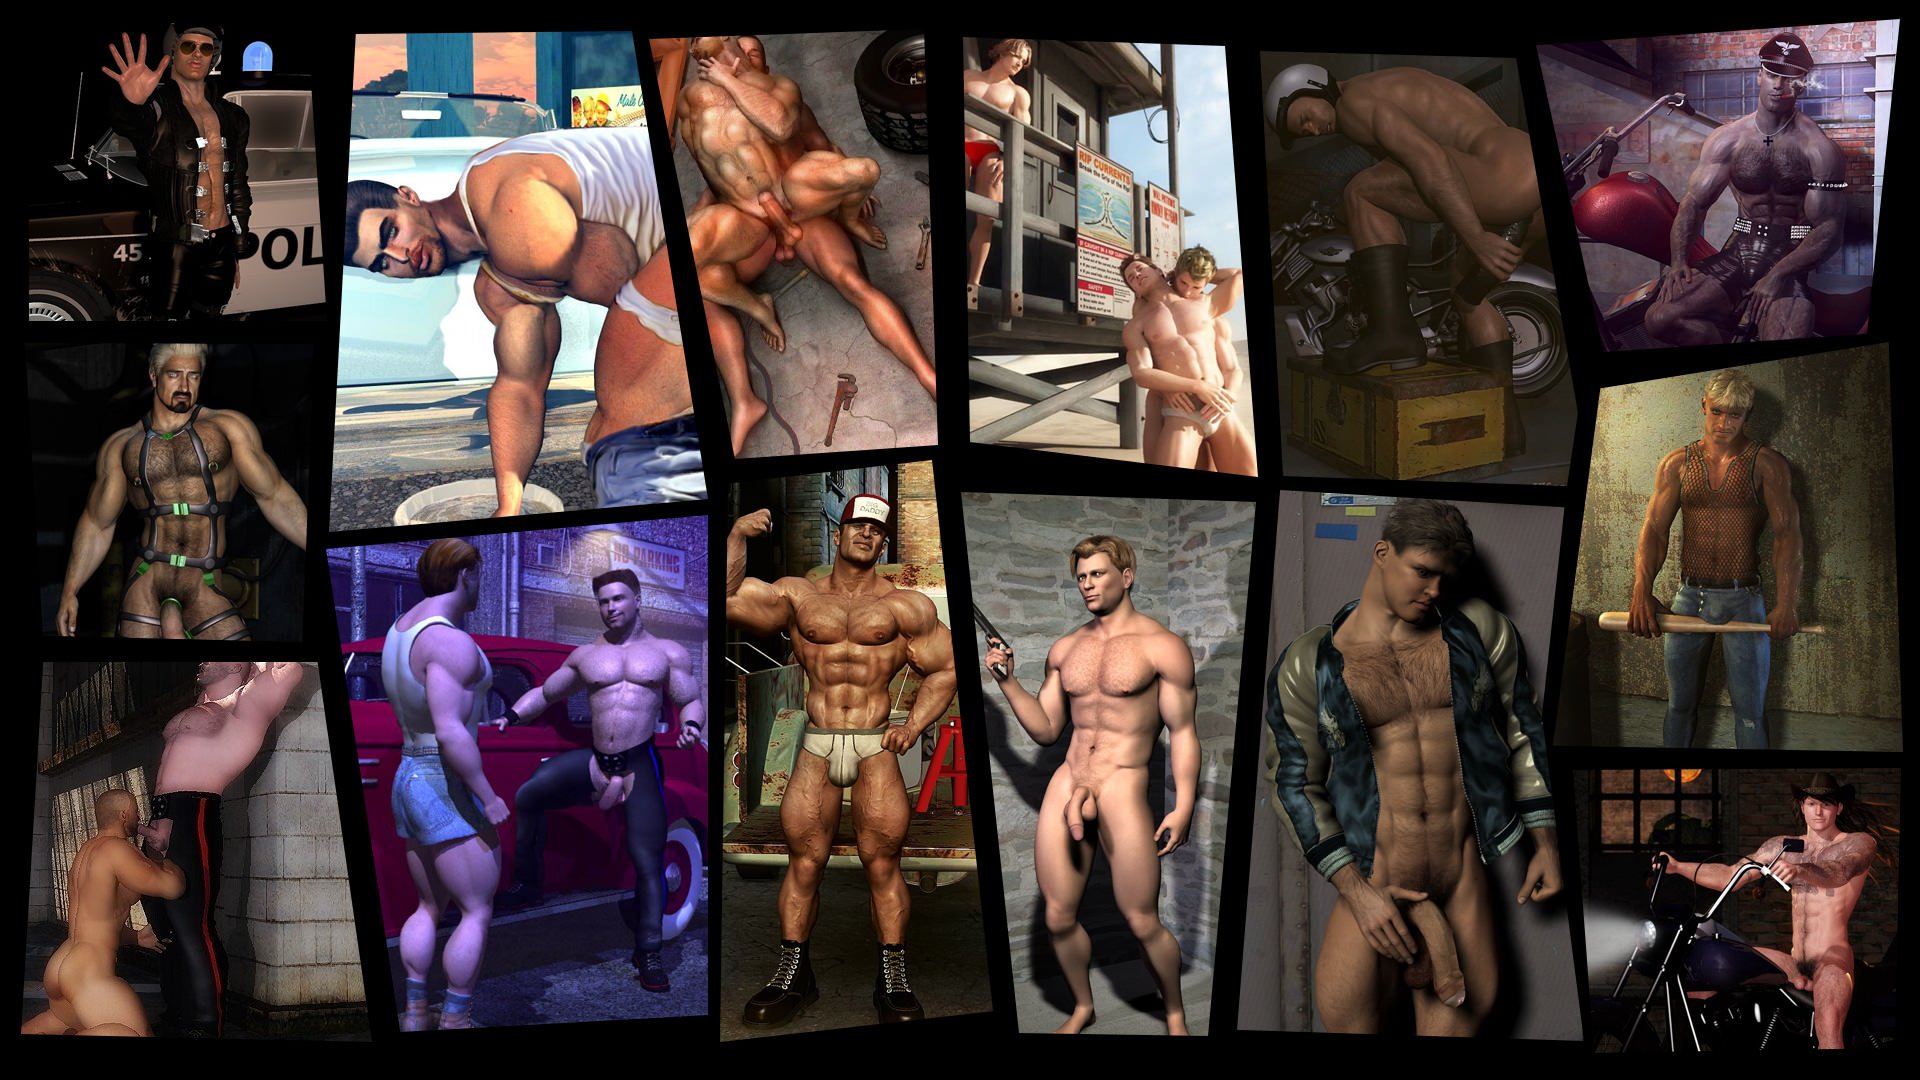 “Gaymer's check out these shocking gay porn games that will make y...